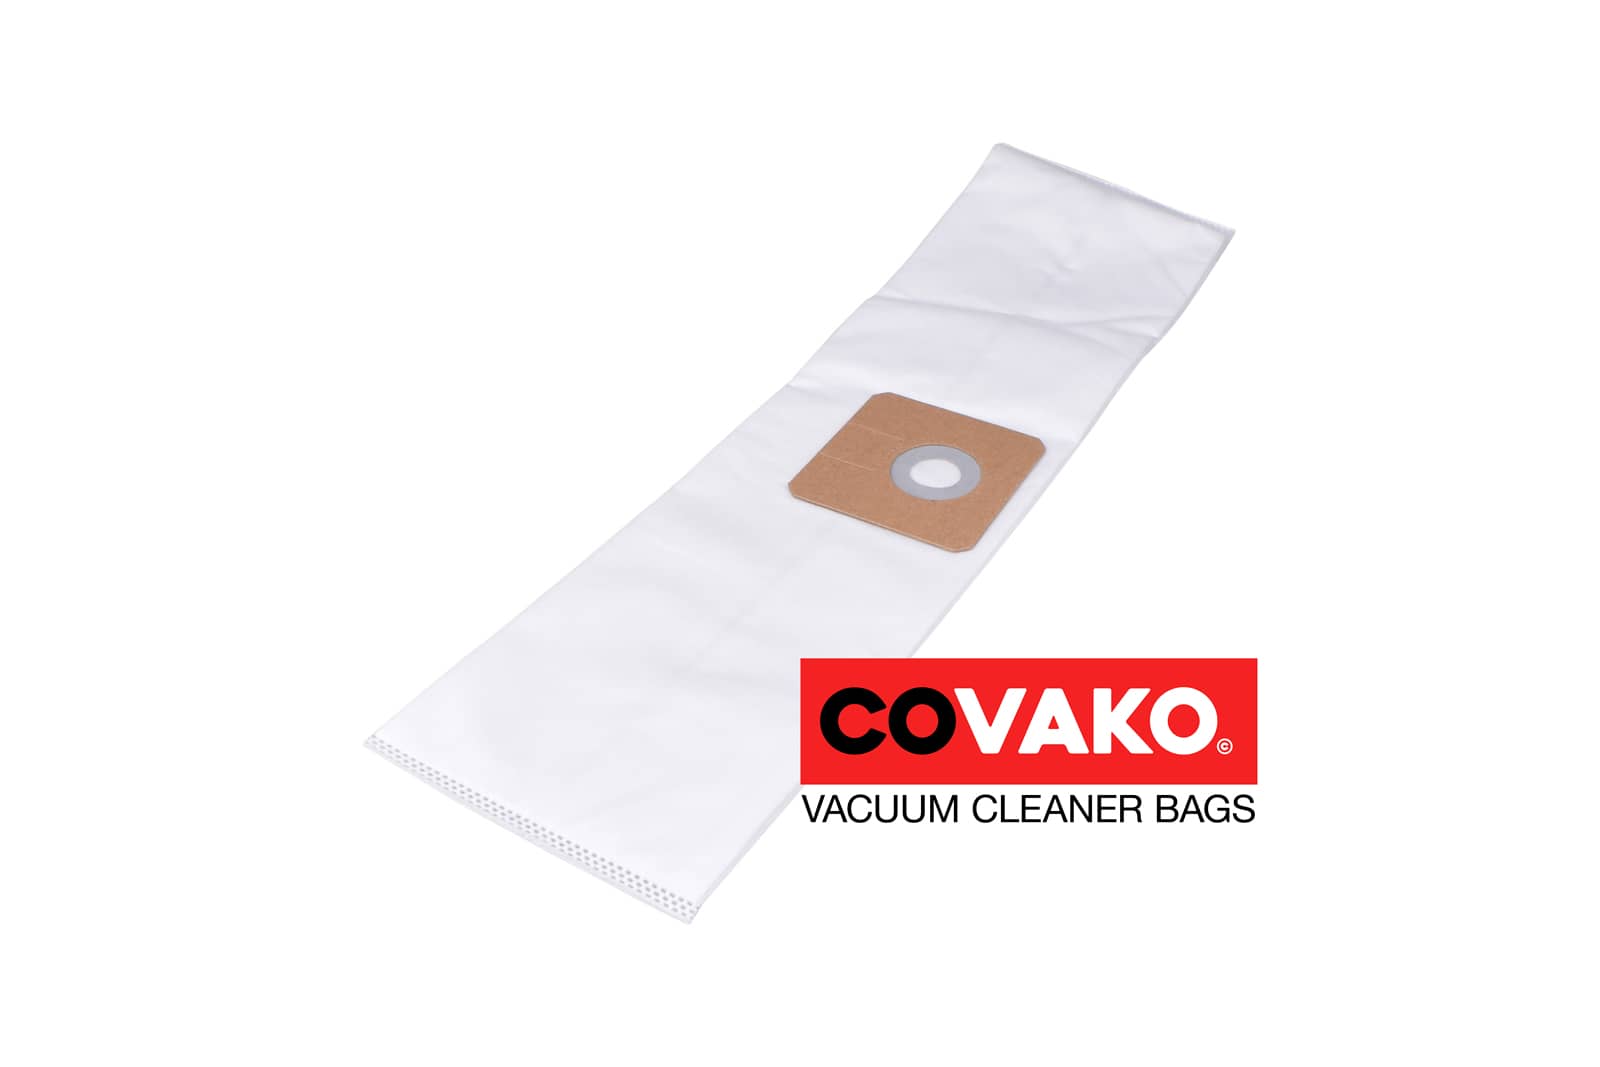 Ecolab Blue Vac + / Synthesis - Ecolab vacuum cleaner bags